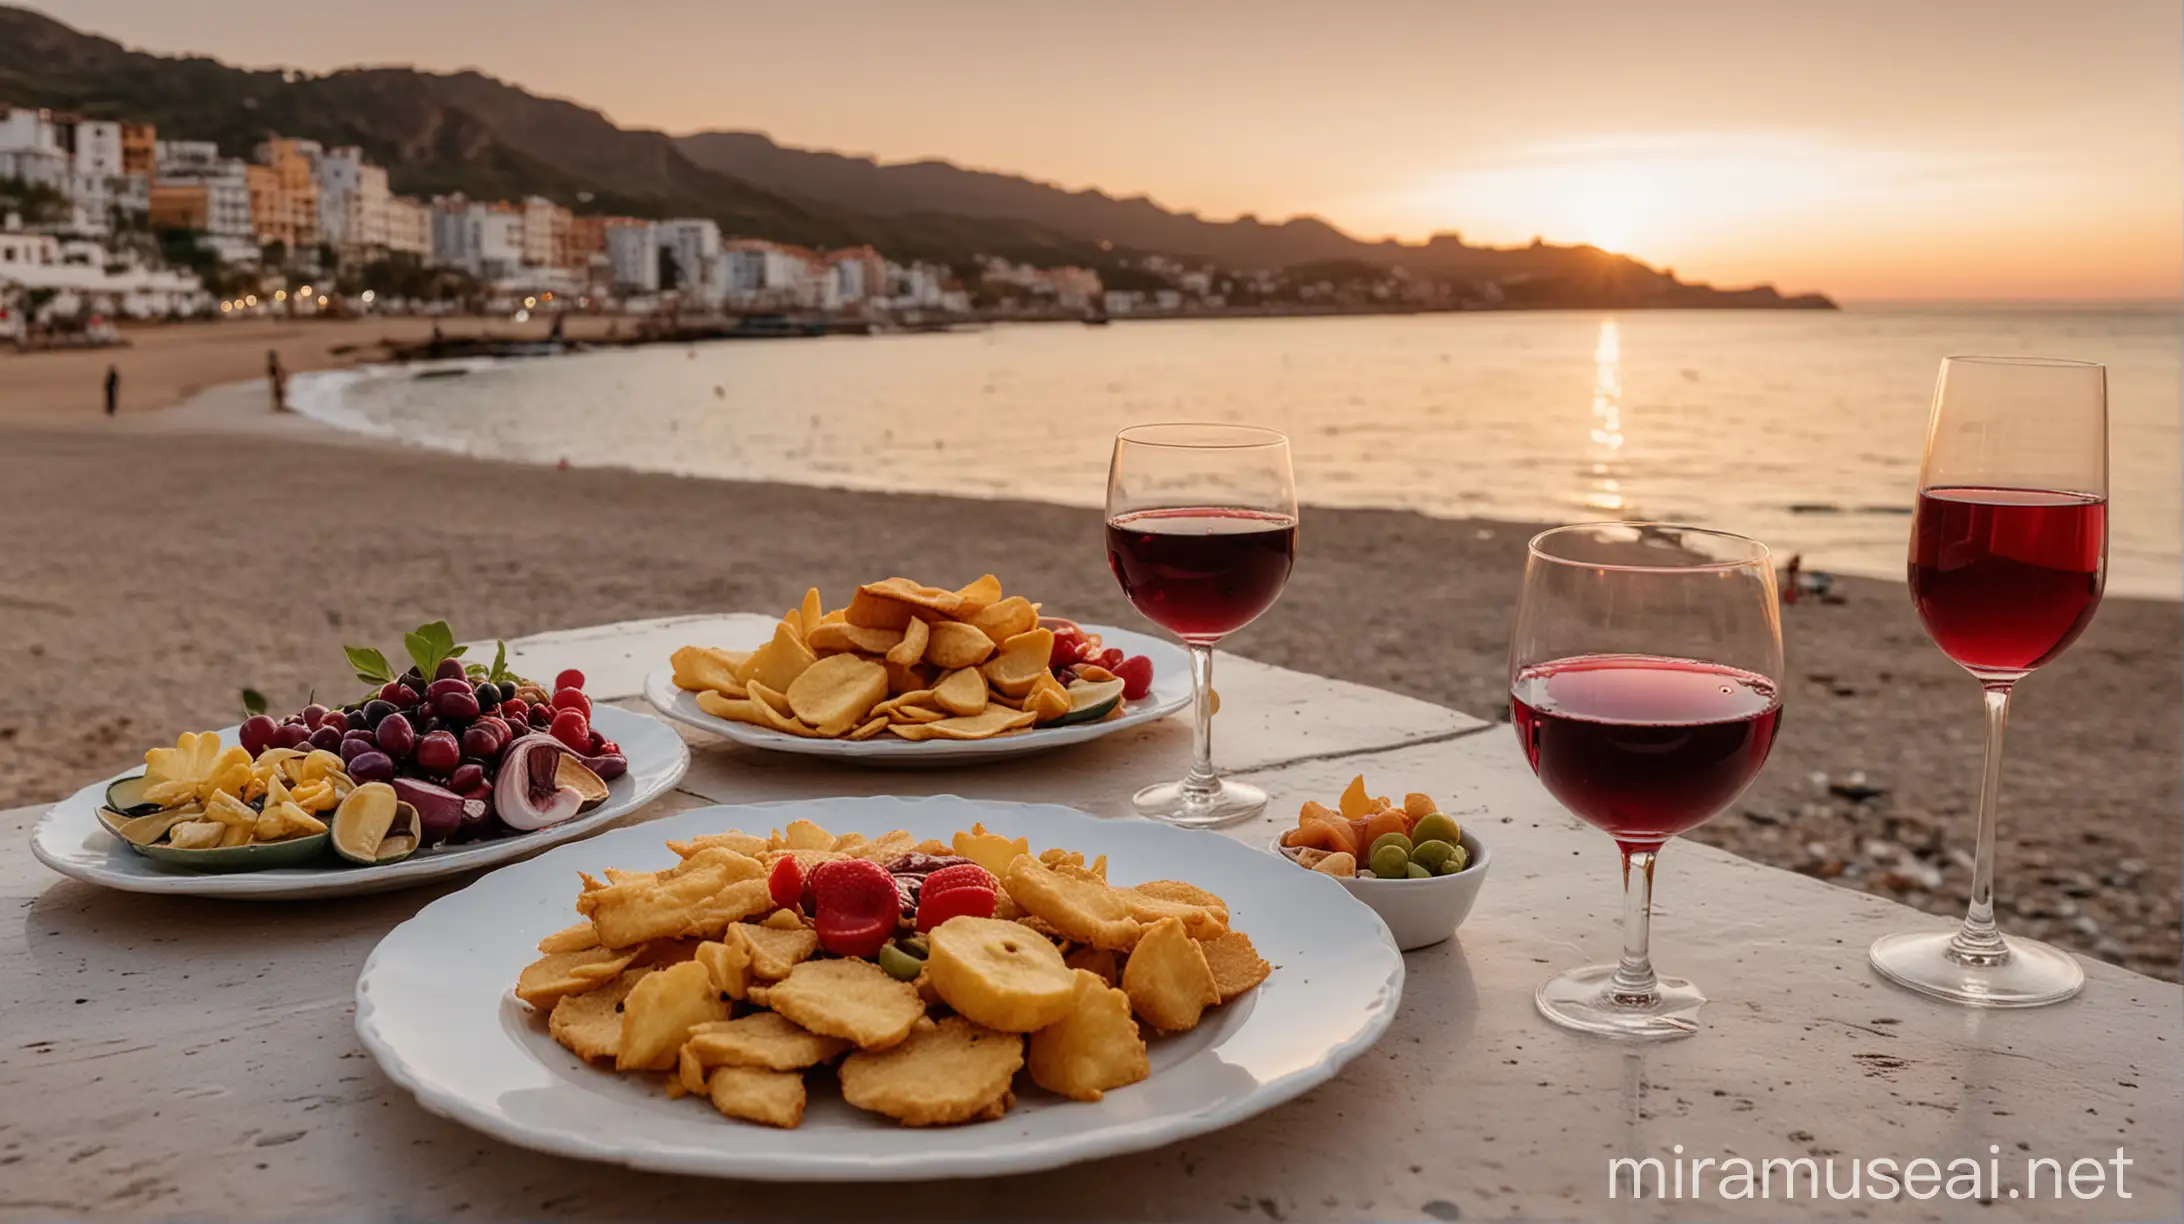 A wide-angle photograph taken with a Canon EOS R5, capturing a beautifully set table by the beach in Málaga during the golden hour. On the table, there are two plates: one with crispy pescadito frito and another with a selection of fresh fruits. A glass of red wine complements the scene. In the background, the beach looks stunning and inviting. --ar 128:85 --v 6.0 --style raw.
